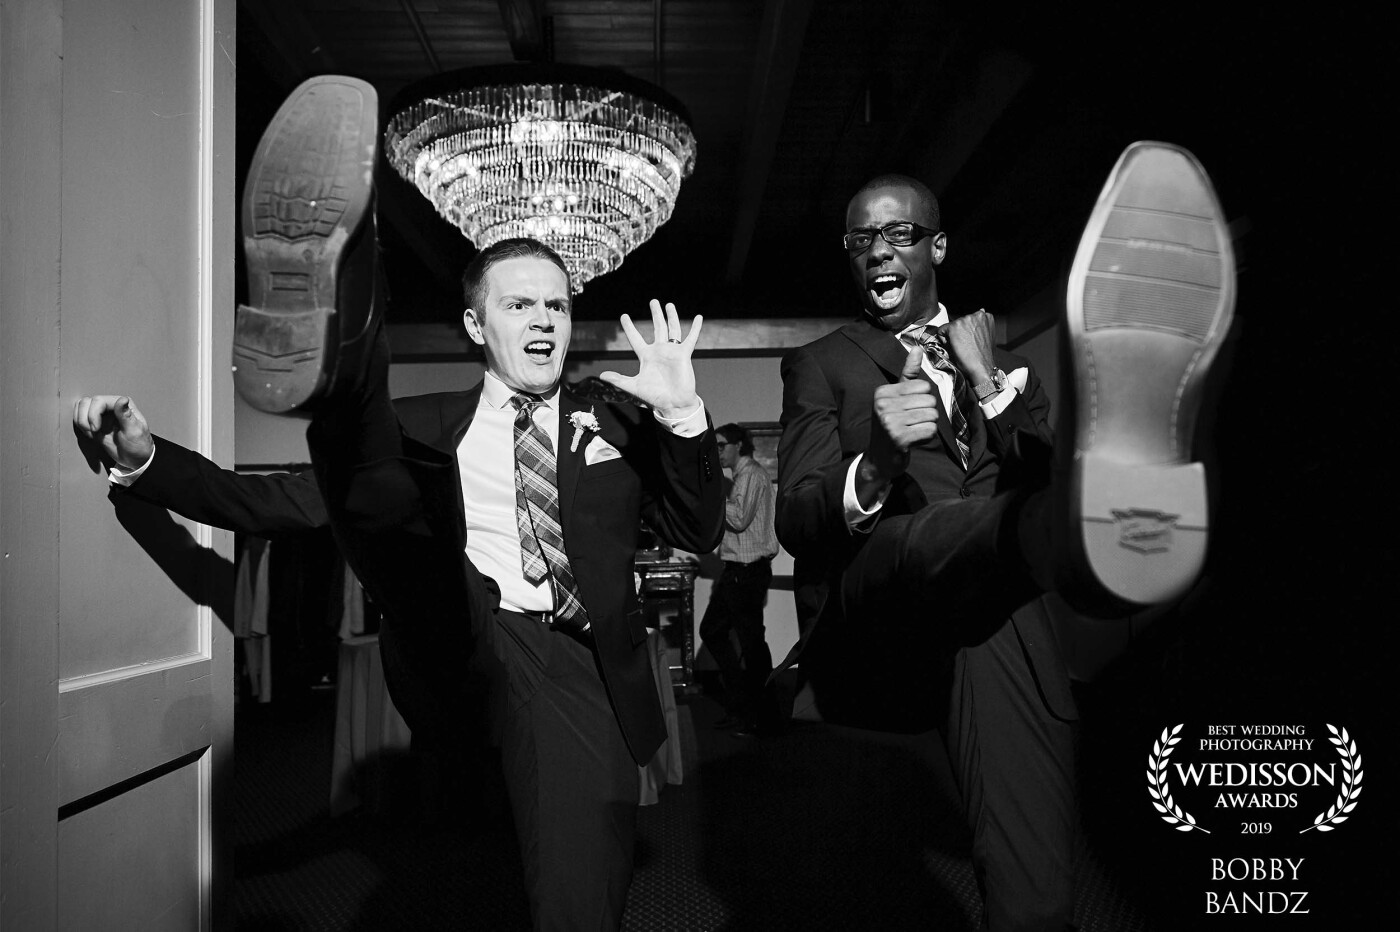 When the groomsmen come into the reception full steam ready to hit the dance floor! Either that or they love kickboxing, The Ninja Turtles, or a combination of the two with a little Bruce Lee mixed in. 